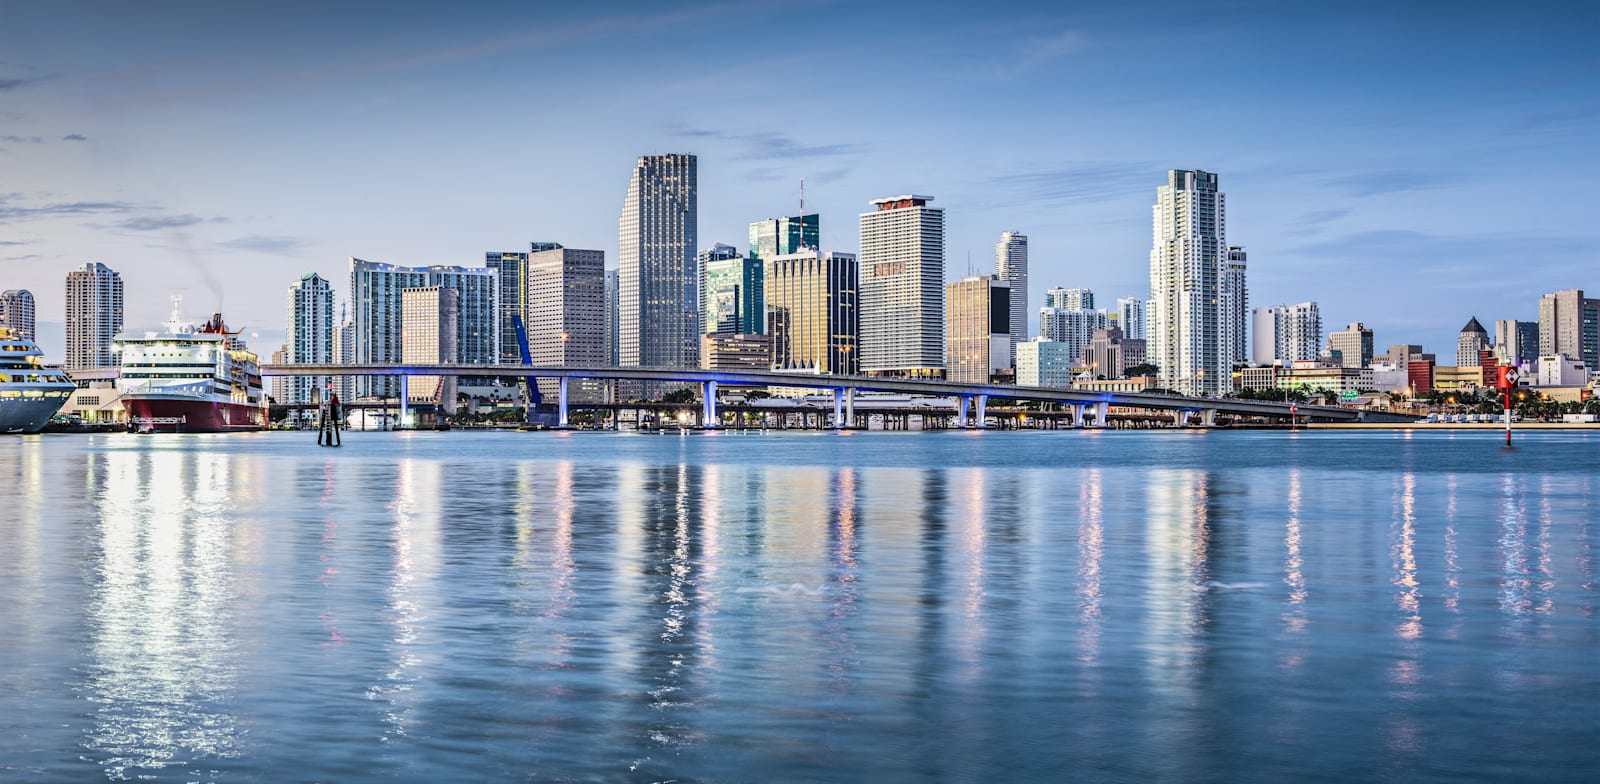 The Miami housing market is cooling down, but it’s still the hottest in the US